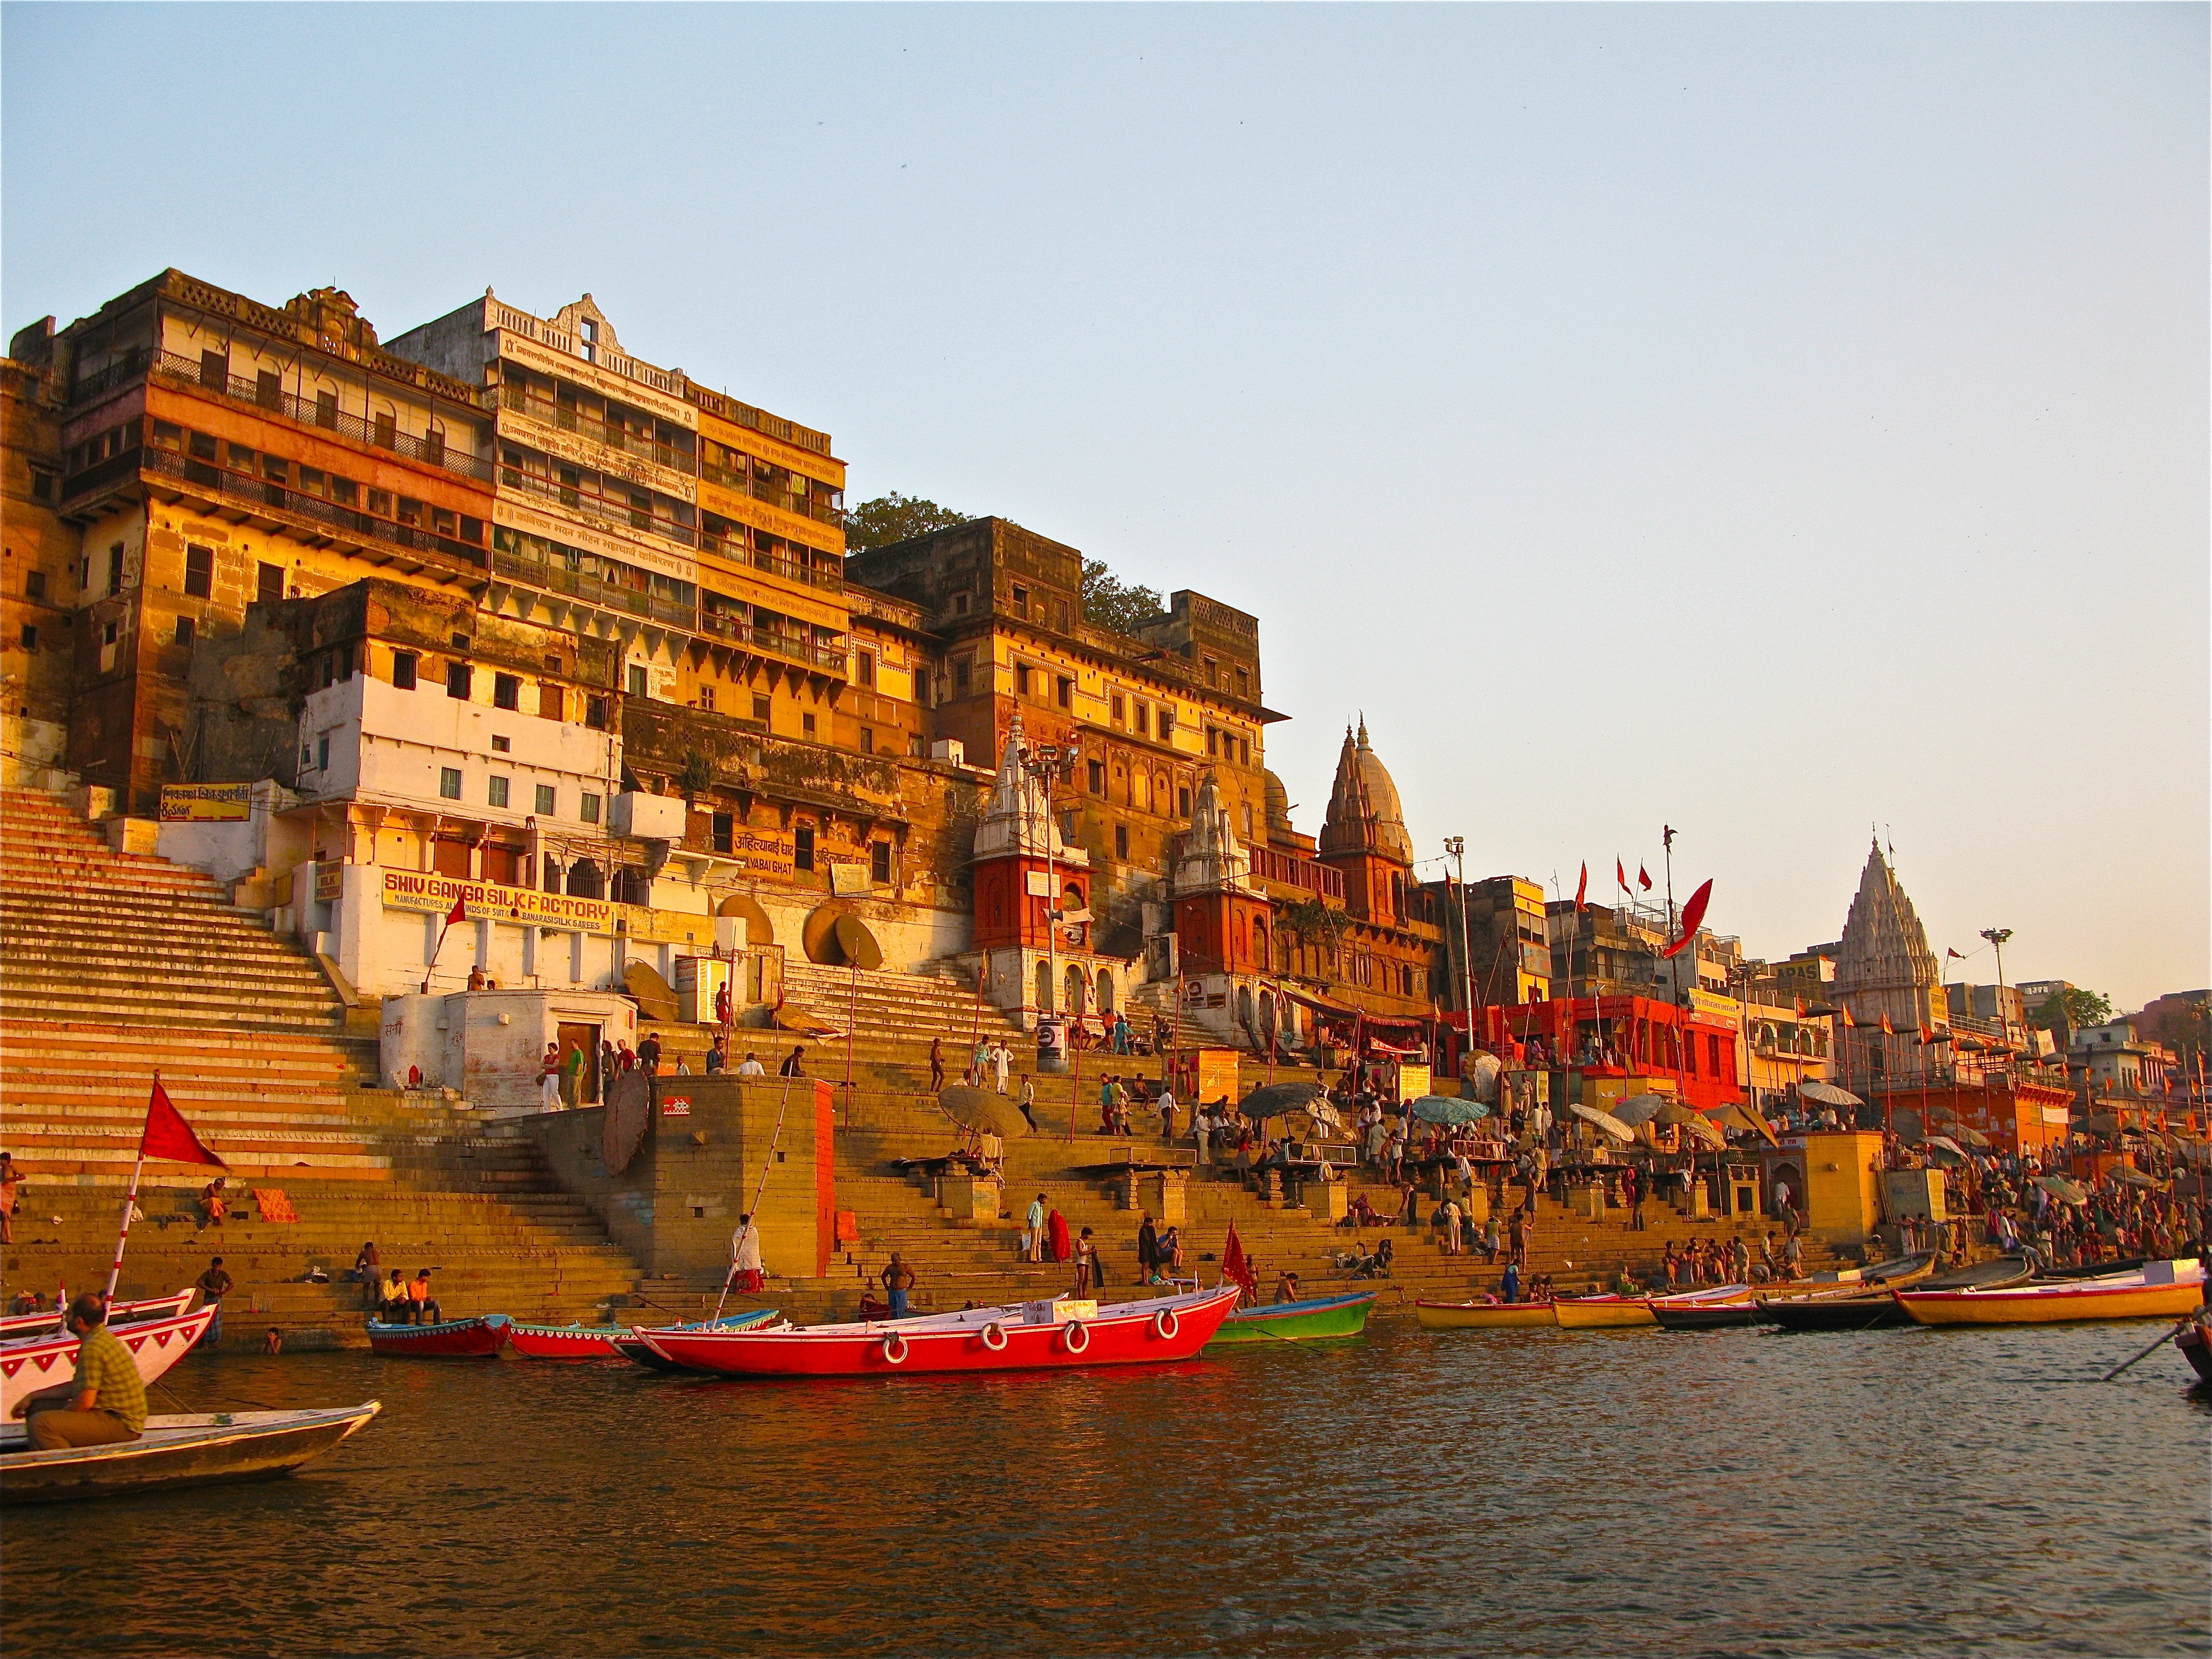 The city of Varanasi is considered sacred by the Hindus and is situated on the banks of the Ganges. But millions of tourists and pilgrims and an apathetic administration has led to a deterioration of living conditions. 